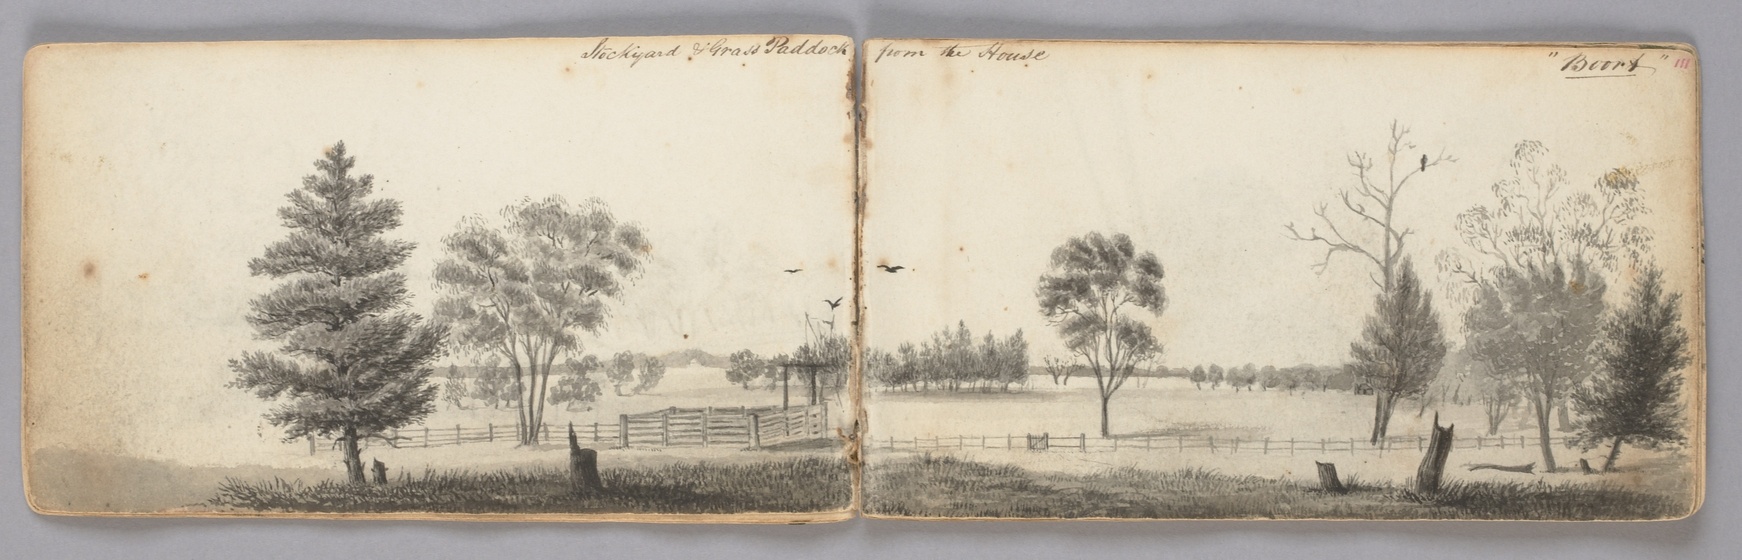 Two pieces of browning paper, side by side, showcasing a drawing of a landscape of an open paddock, covered with different types of trees, stumps and wooden fences and stock yards.